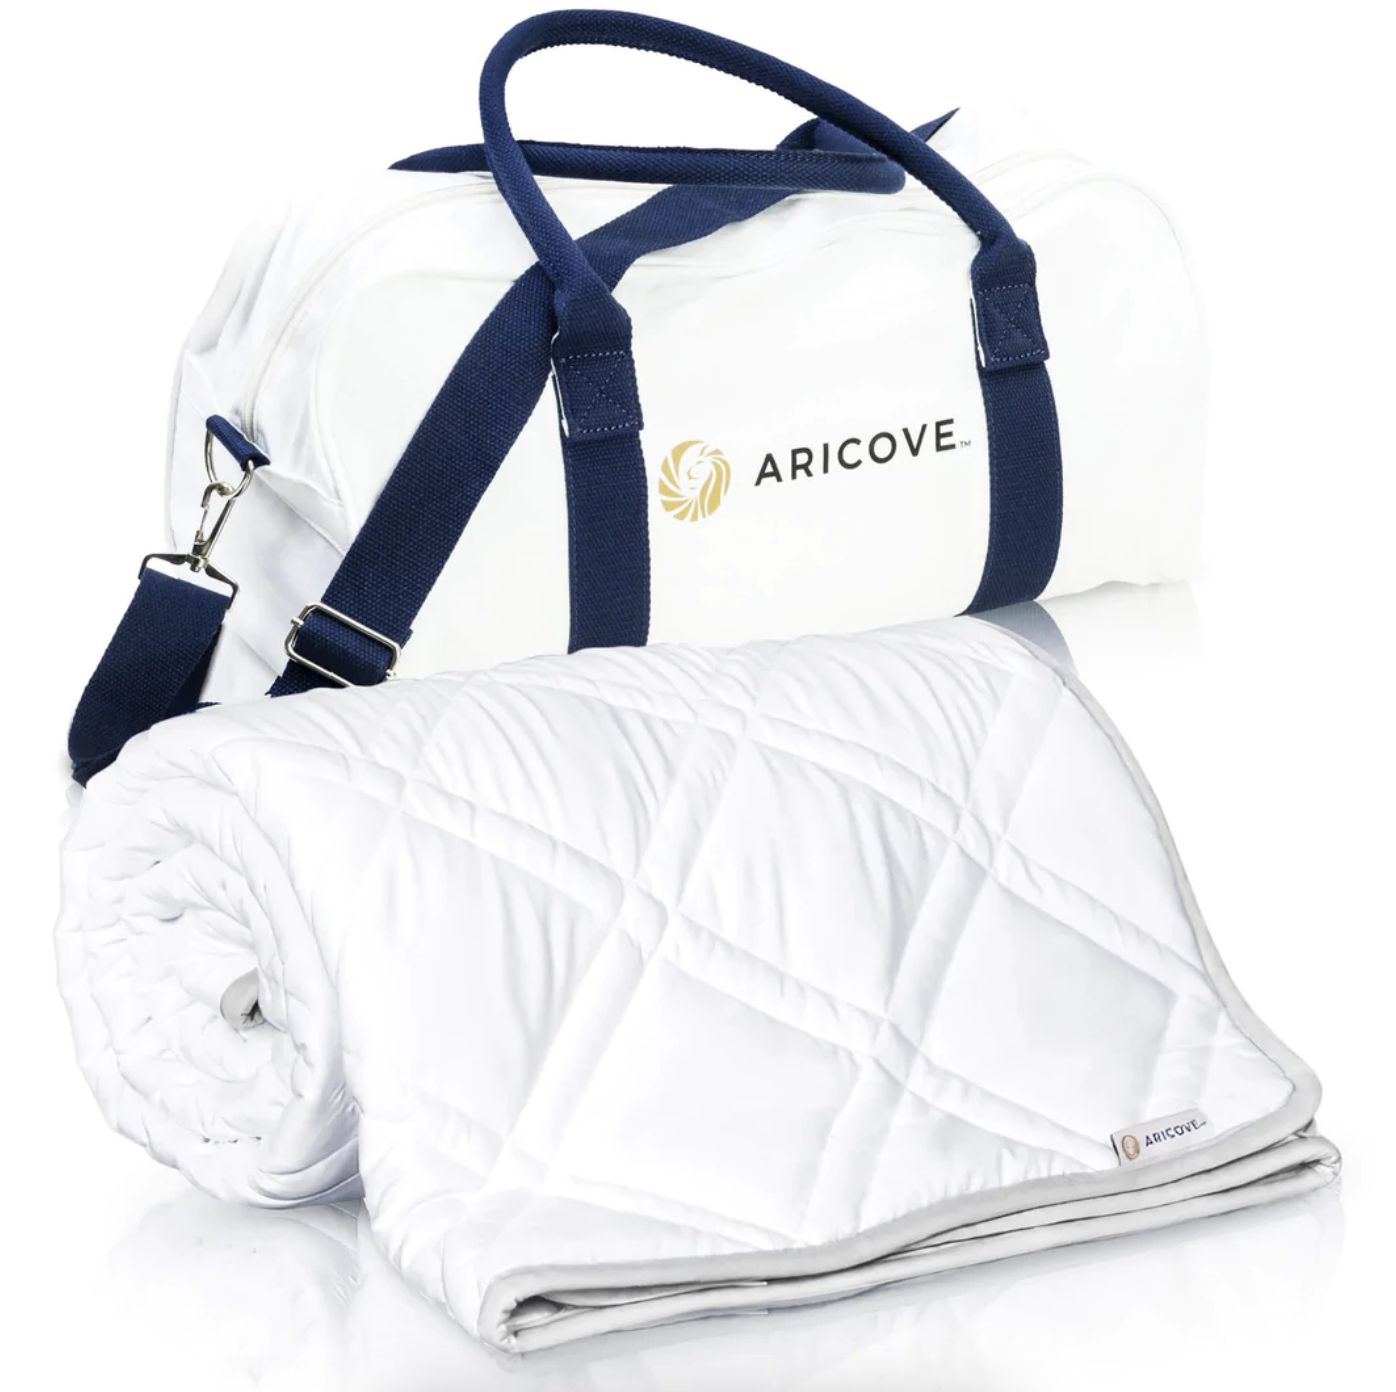 A white weighted blanket and storage bag is shown